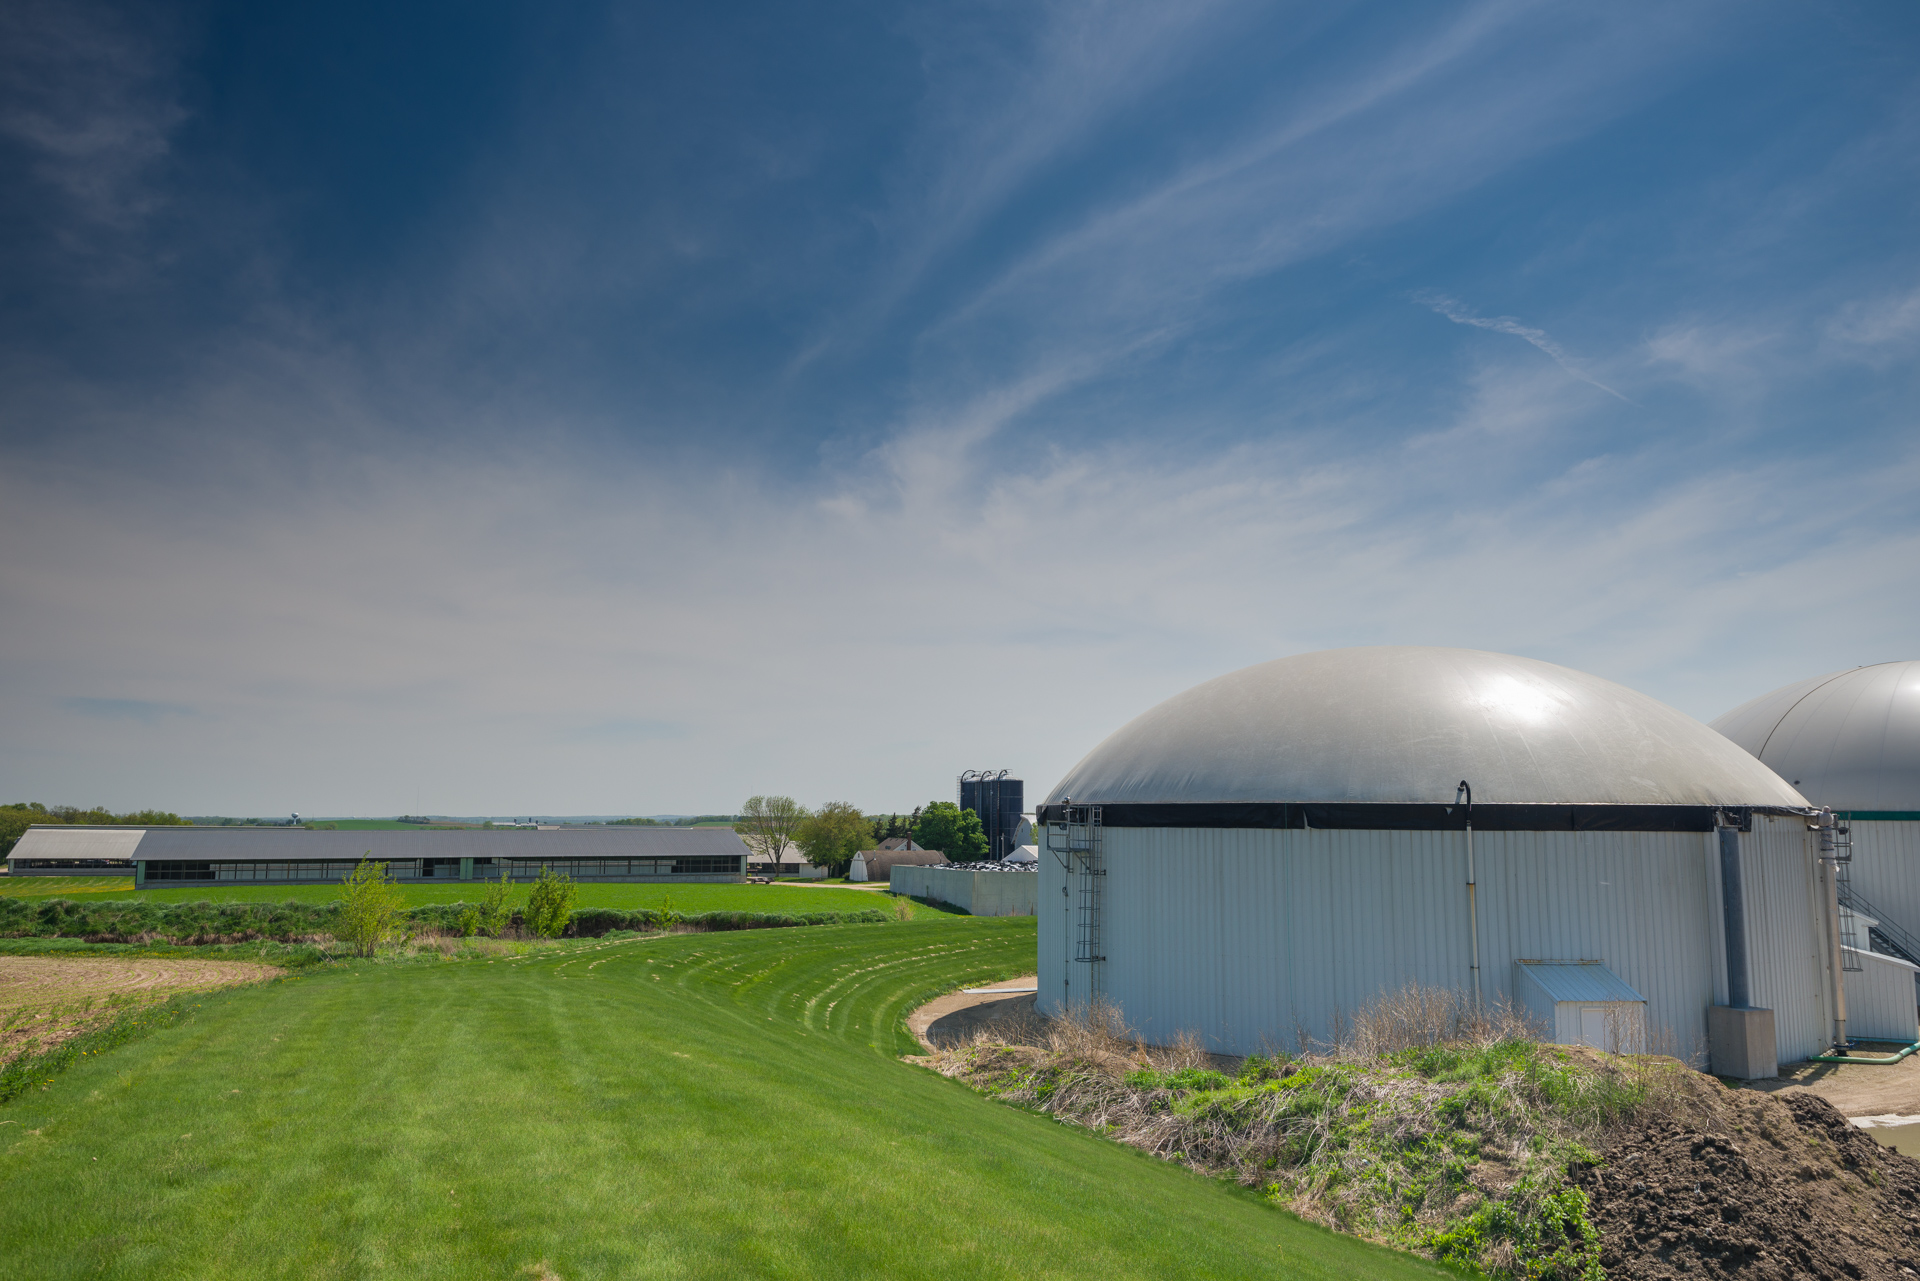 Biogas located on a Renewable Natural Gas project in Yakima, Washington